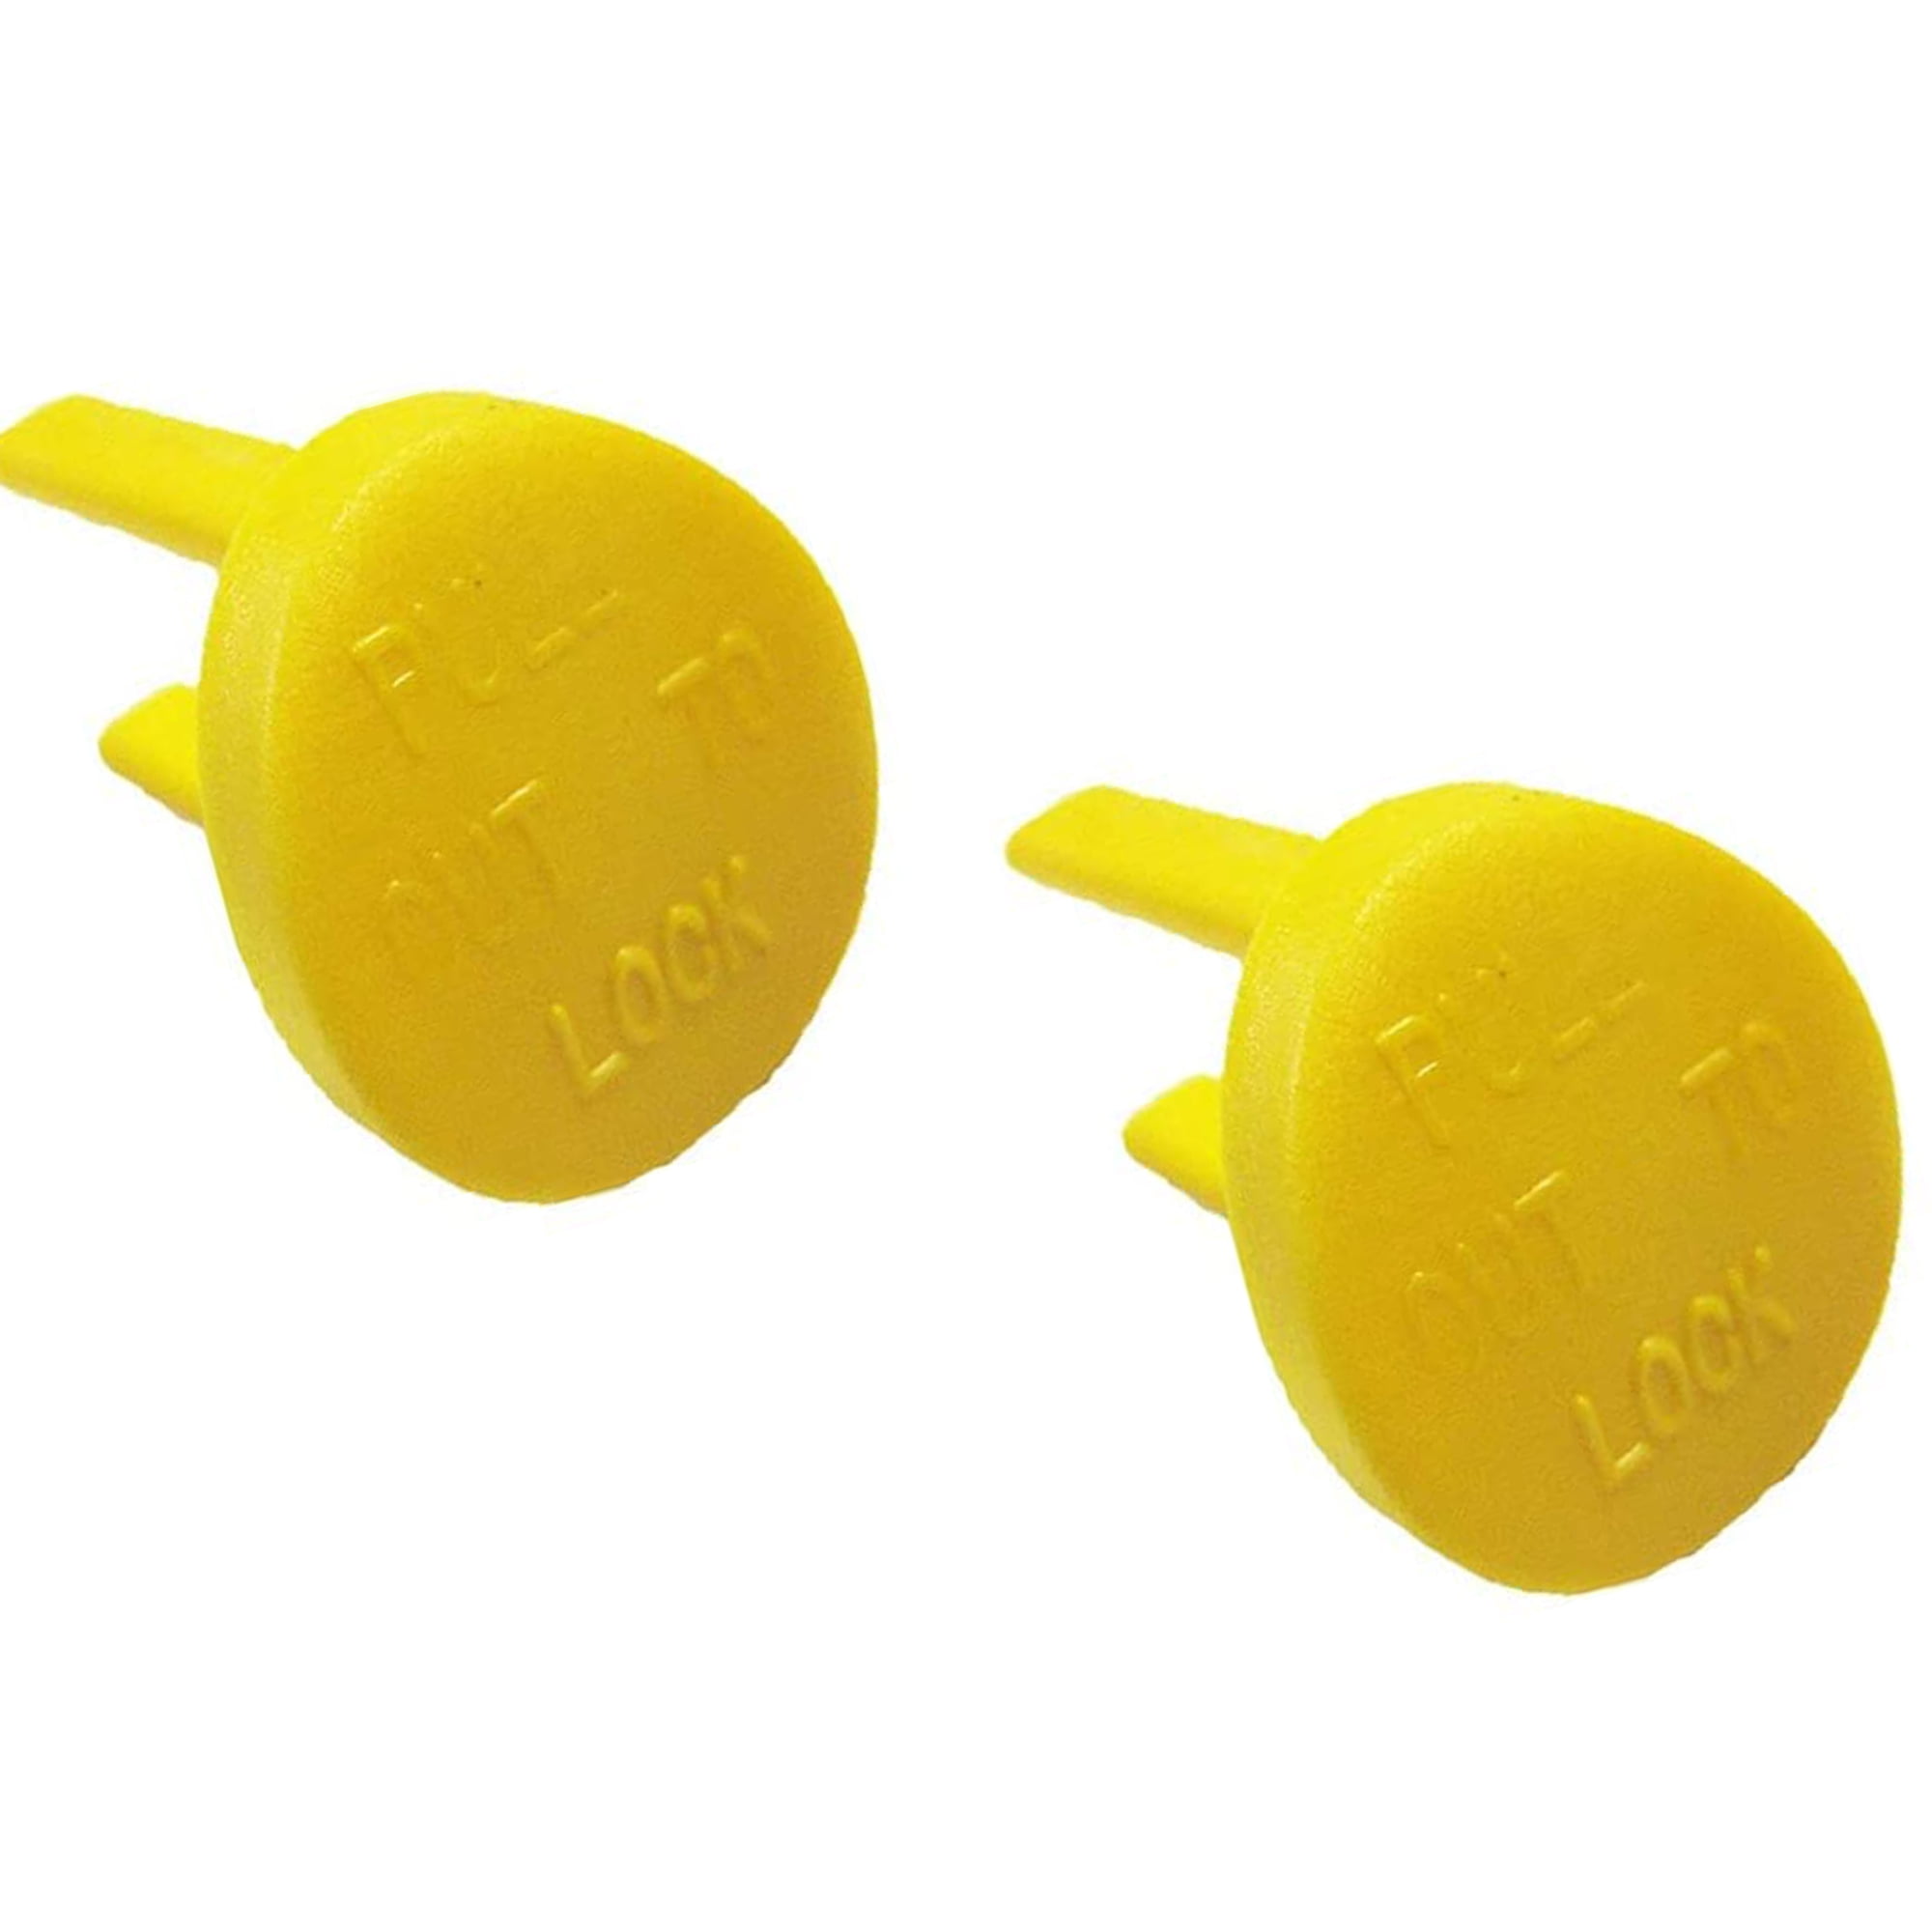 Yellow Safety Switch Key Compatible with Craftsman Radial Arm Jointer Band  Drill Sears Table Saw, Sander, Band Saw, Drill Press Parts- Oval  (2pcs-pack)